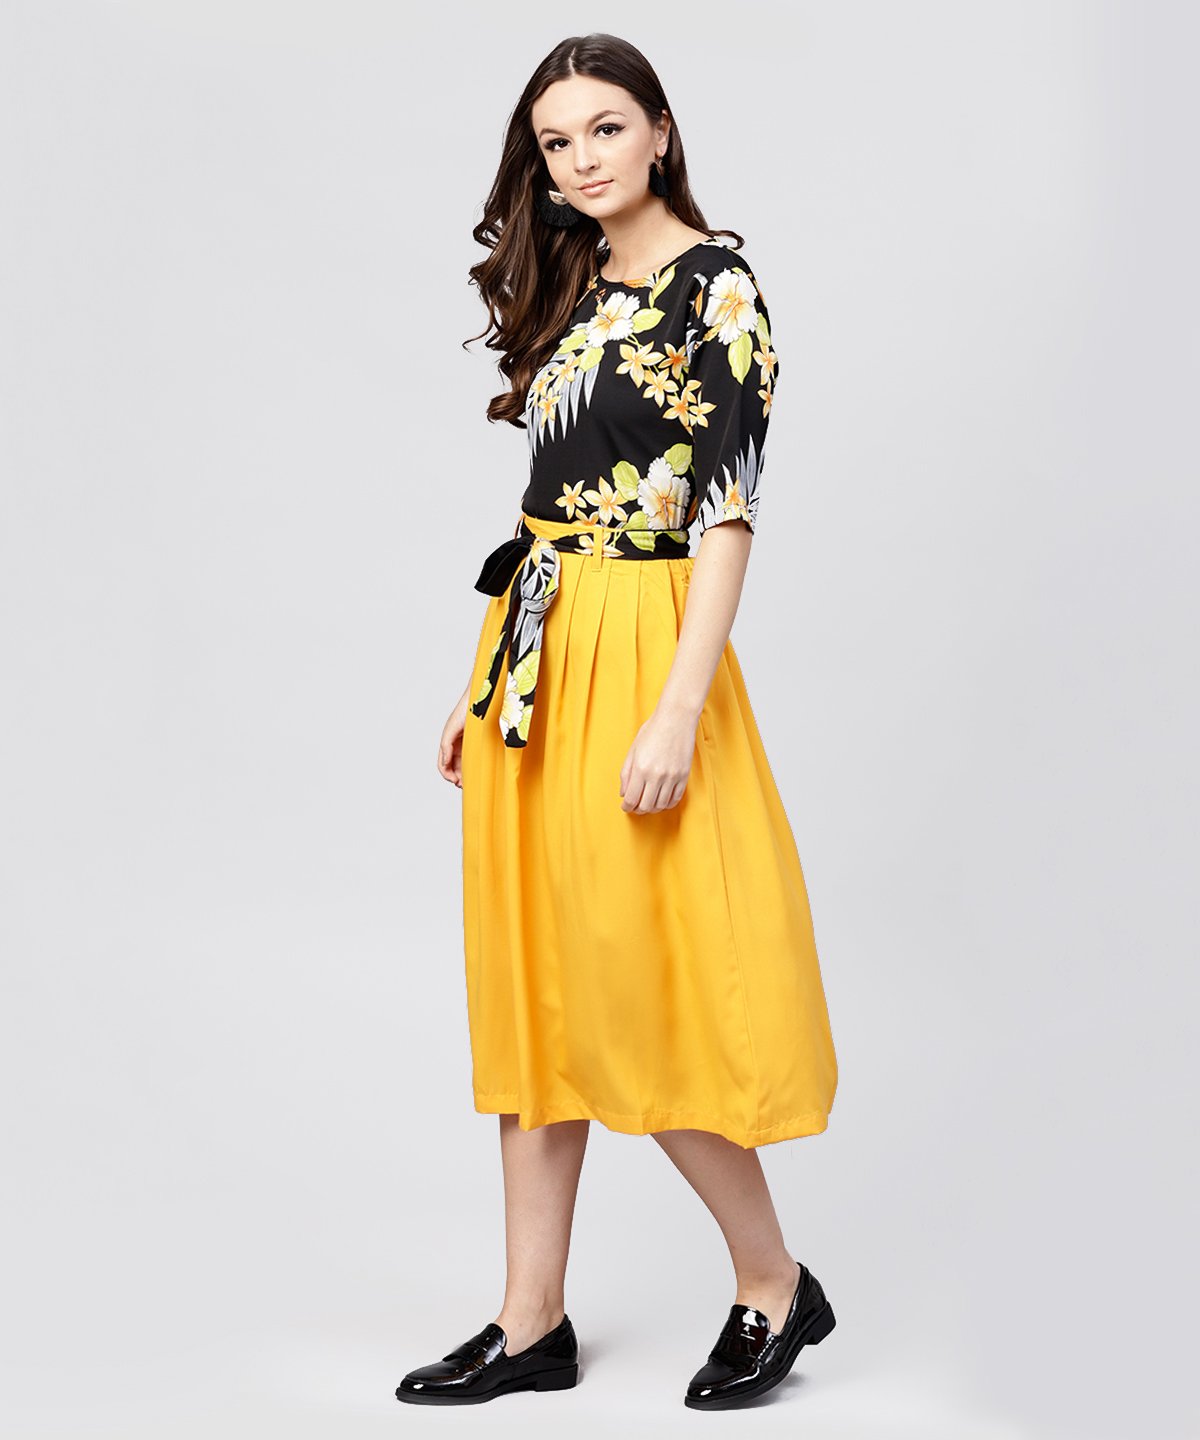 Women's Black Printed Half Sleeve Tops With Yellow Calf Length Skirt With Belt - Nayo Clothing